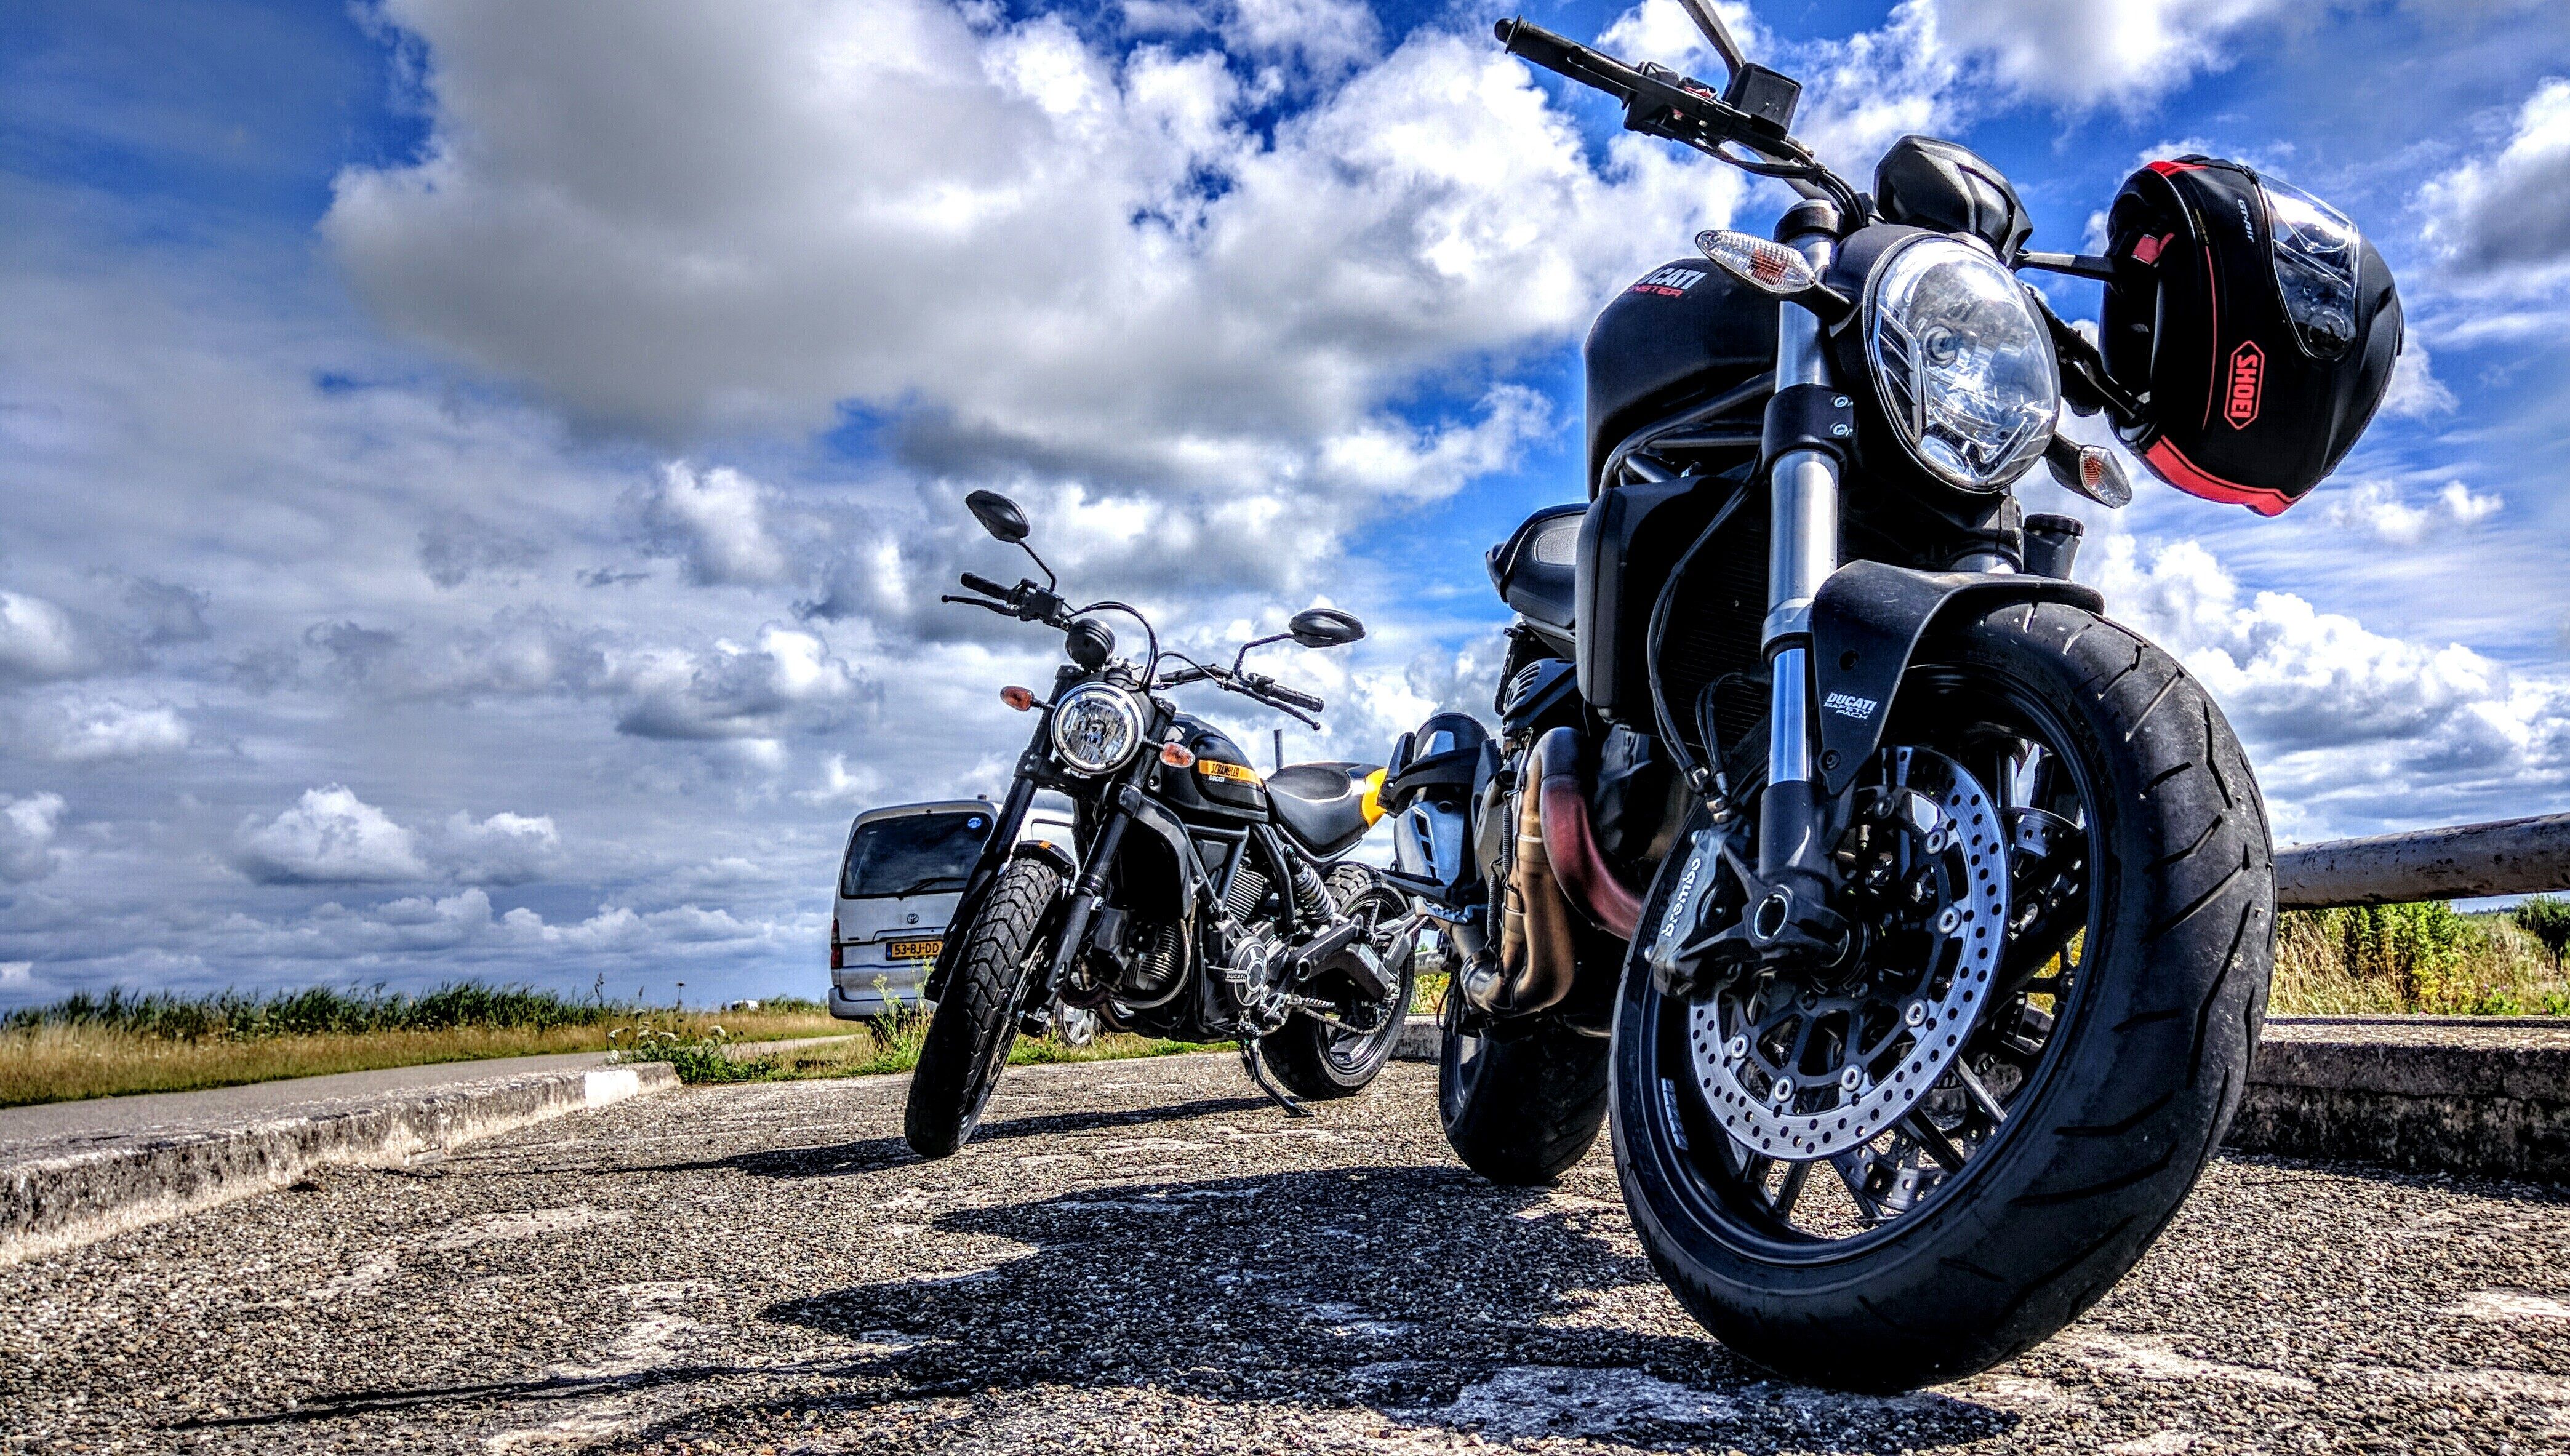 Motorcycle Safety: What You Need To Know